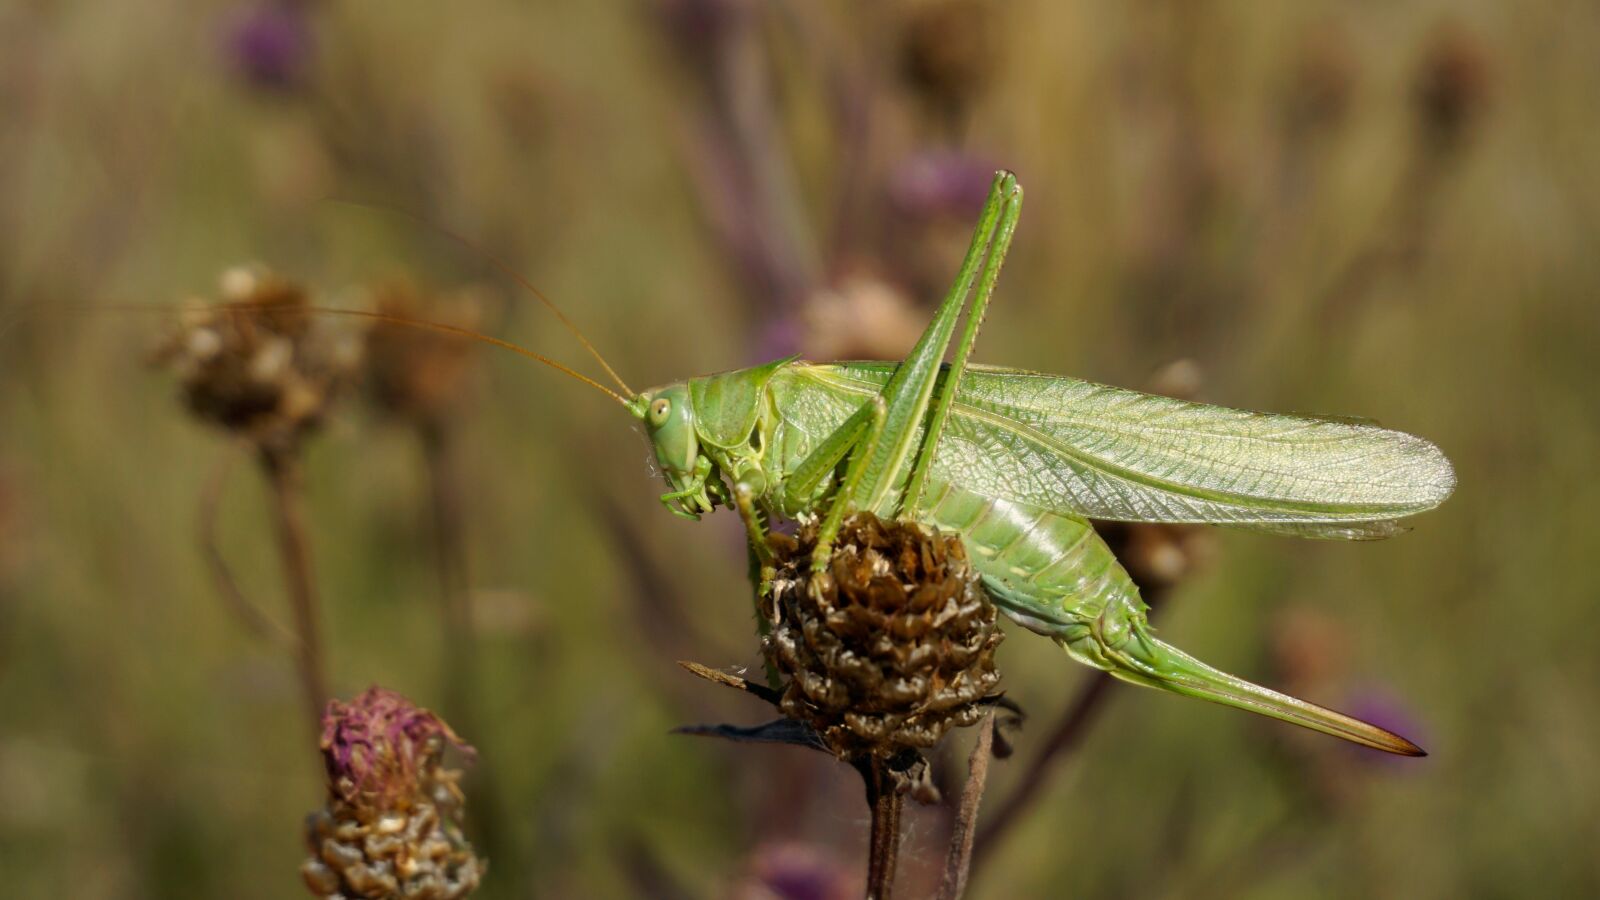 Sony a6000 sample photo. Grasshopper, nature, insect photography